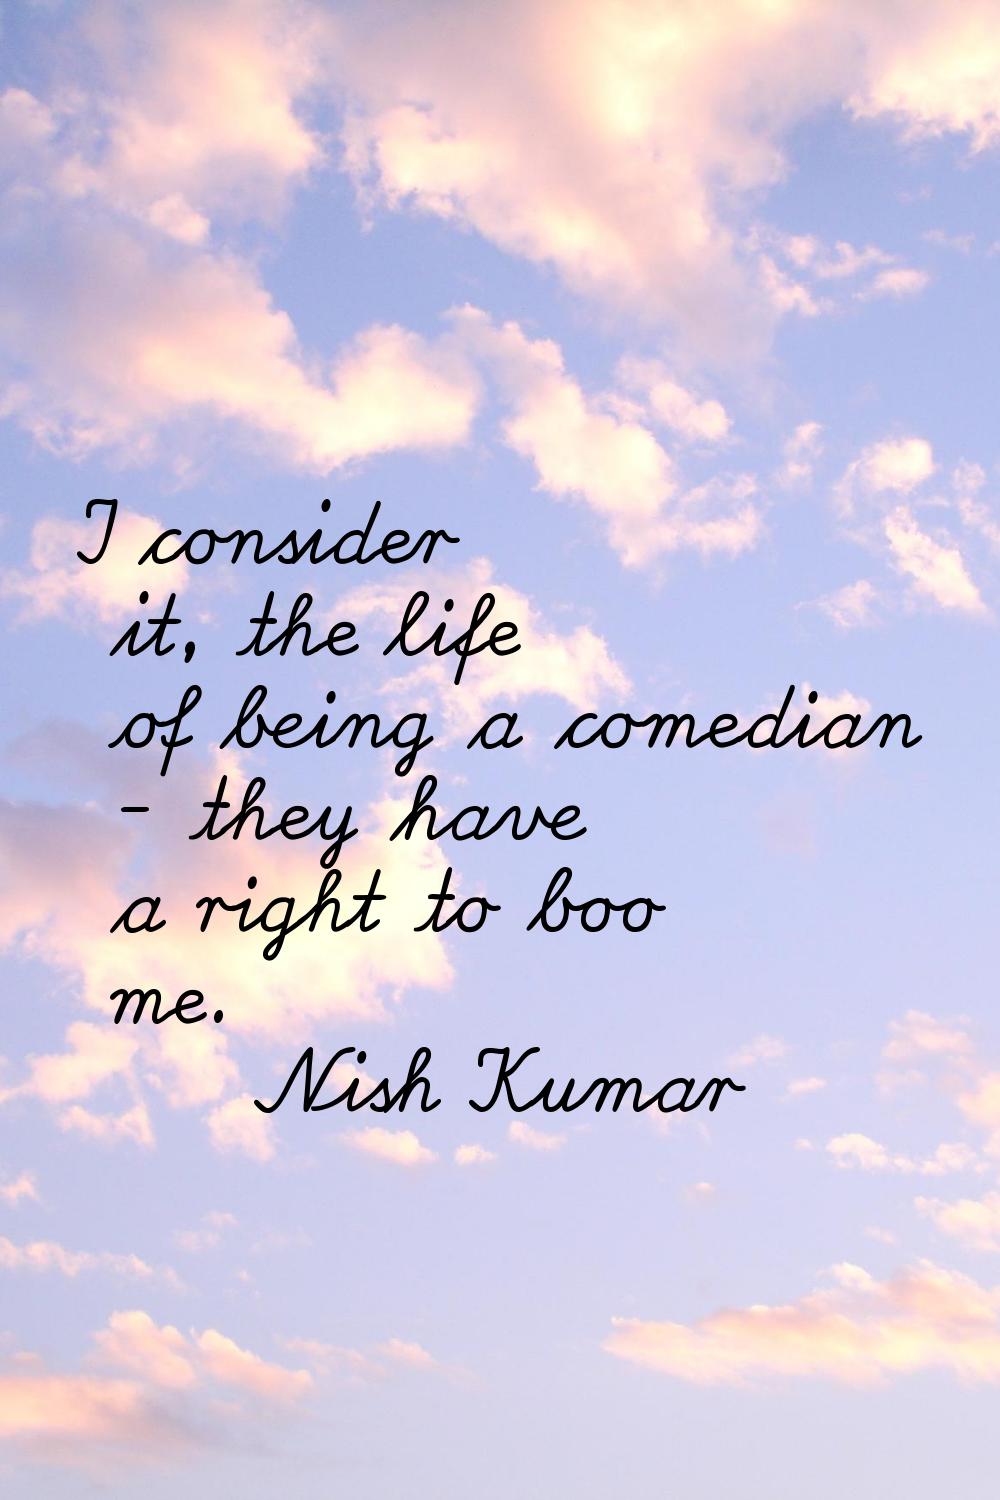 I consider it, the life of being a comedian - they have a right to boo me.